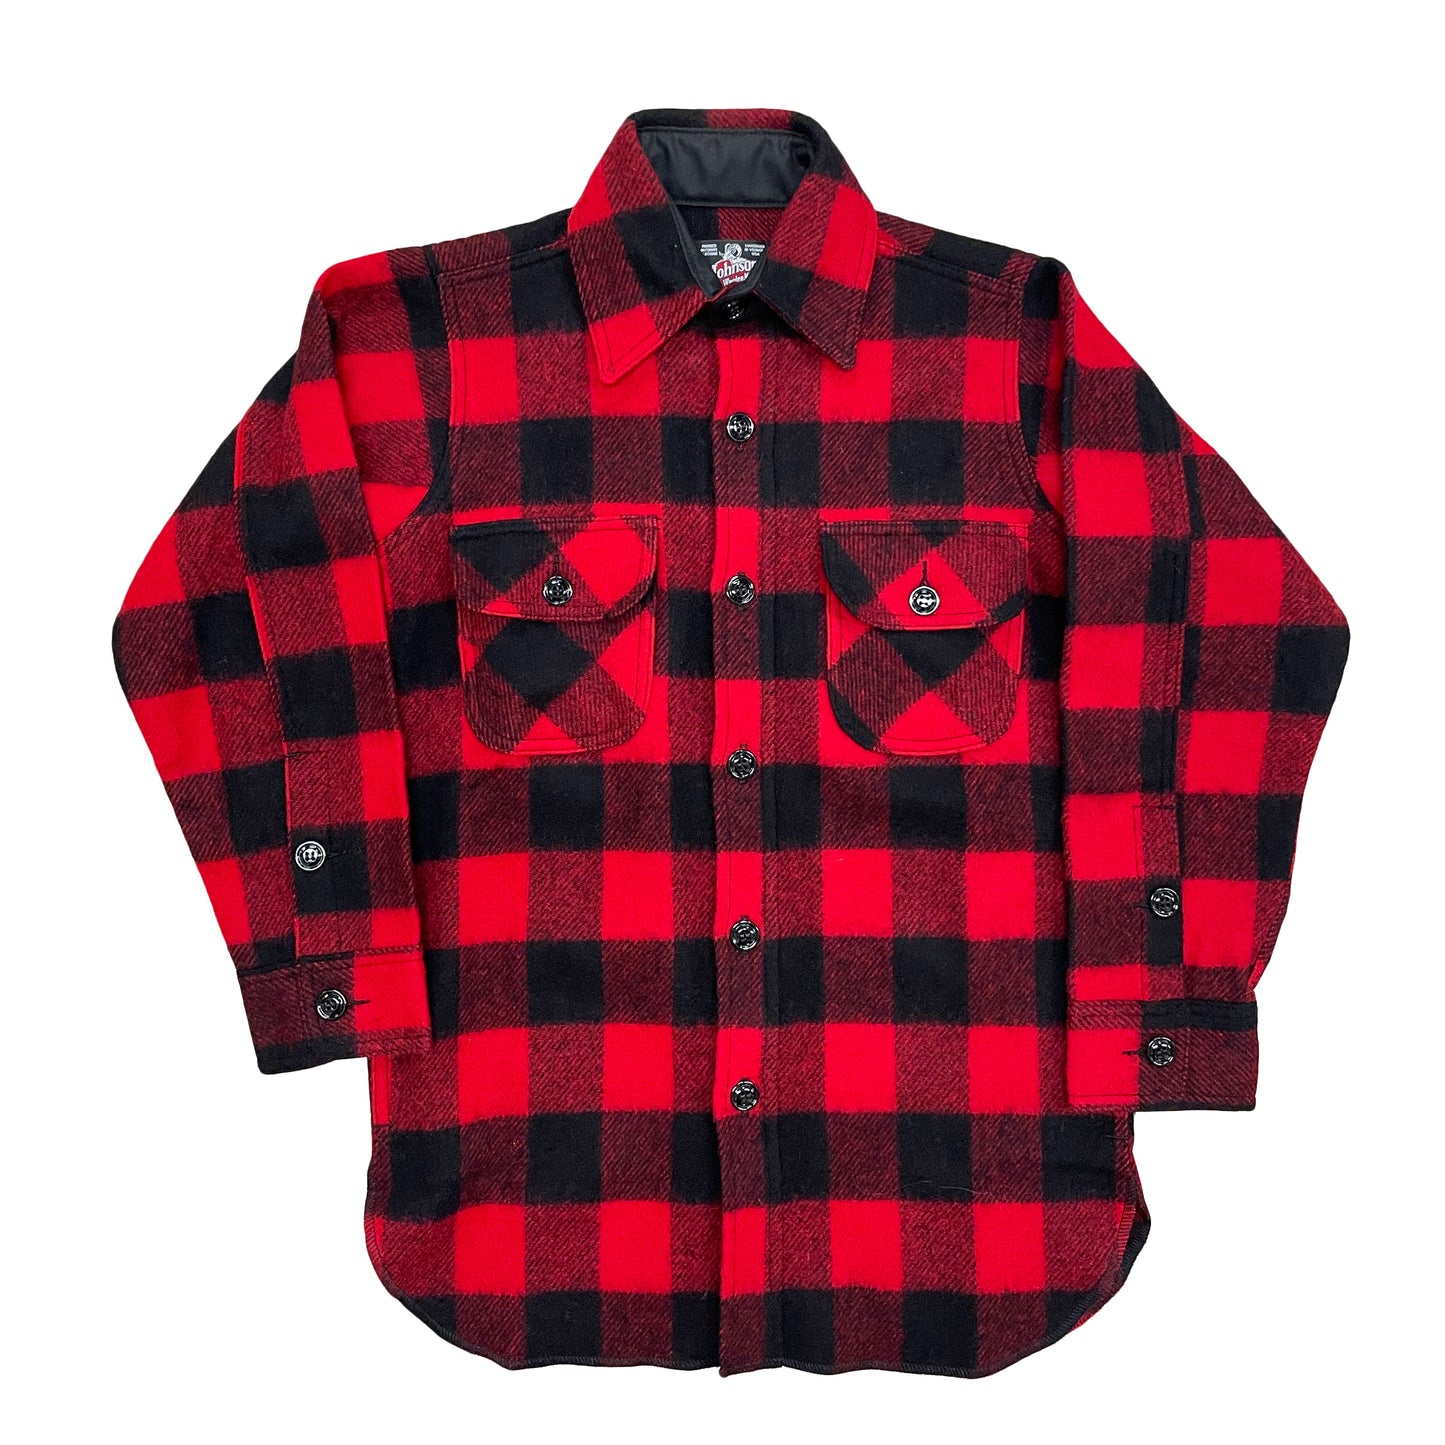 Long Tail Button Down long sleeve wool shirt with a 6 button front, button cuffs and two front chest pockets. Shown in red and black buffalo check